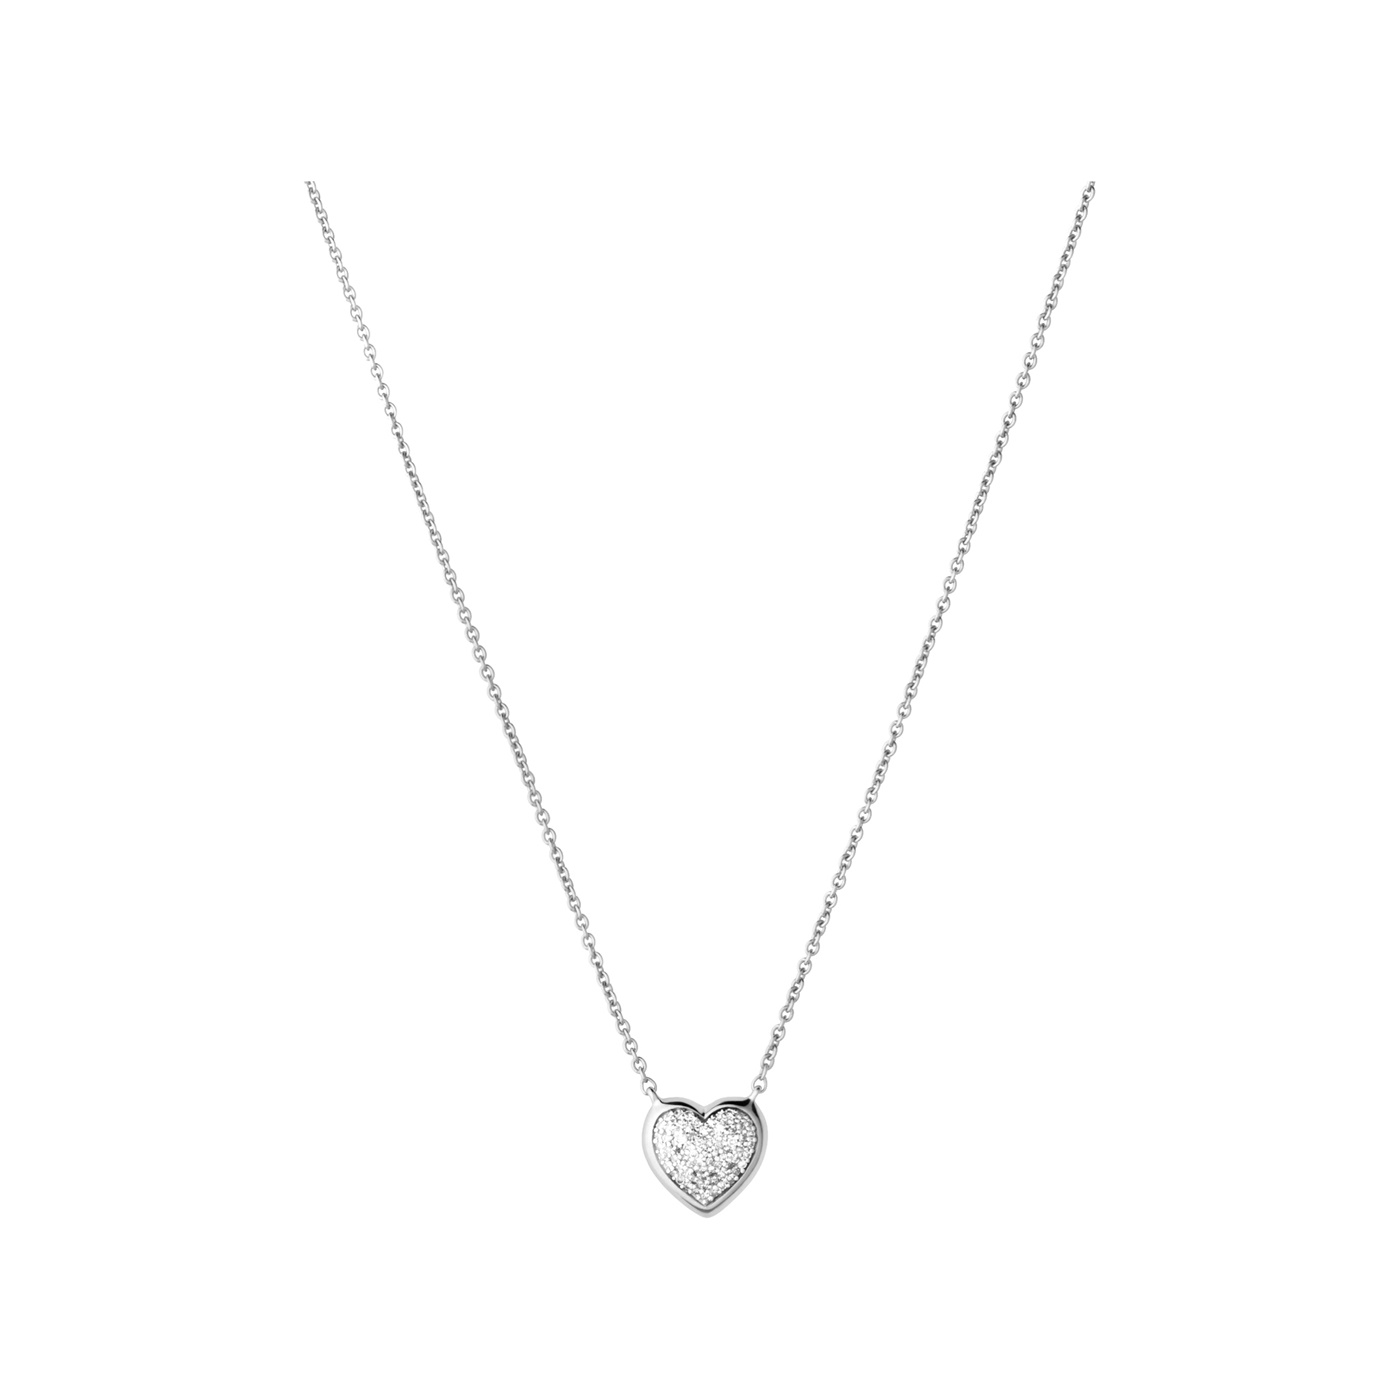 silver necklace diamond essentials sterling silver u0026 pave heart necklace | women necklaces| TPXXOFZ